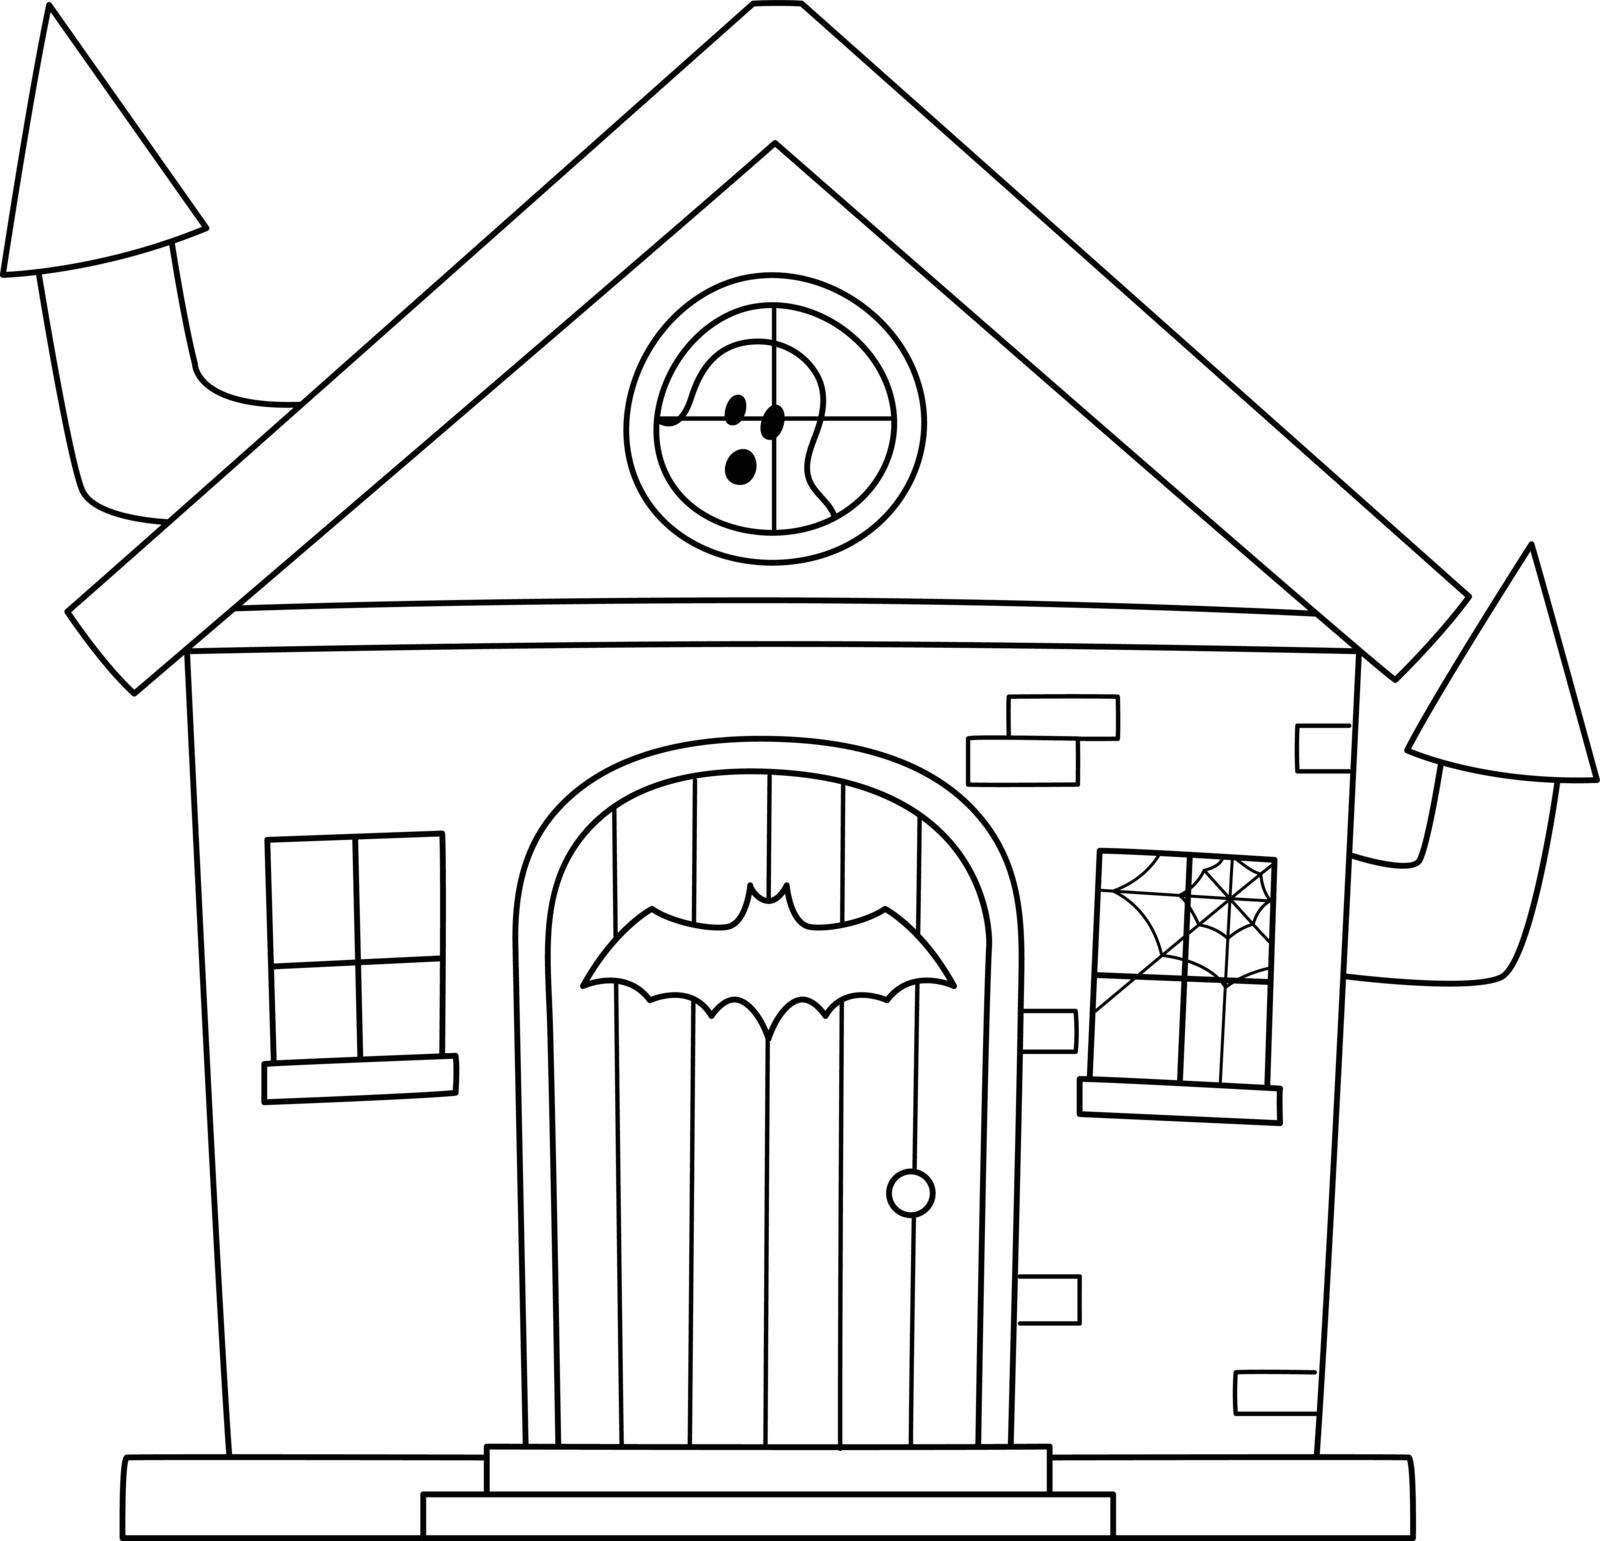 Trick or Treating Halloween Coloring Page Isolated by abbydesign